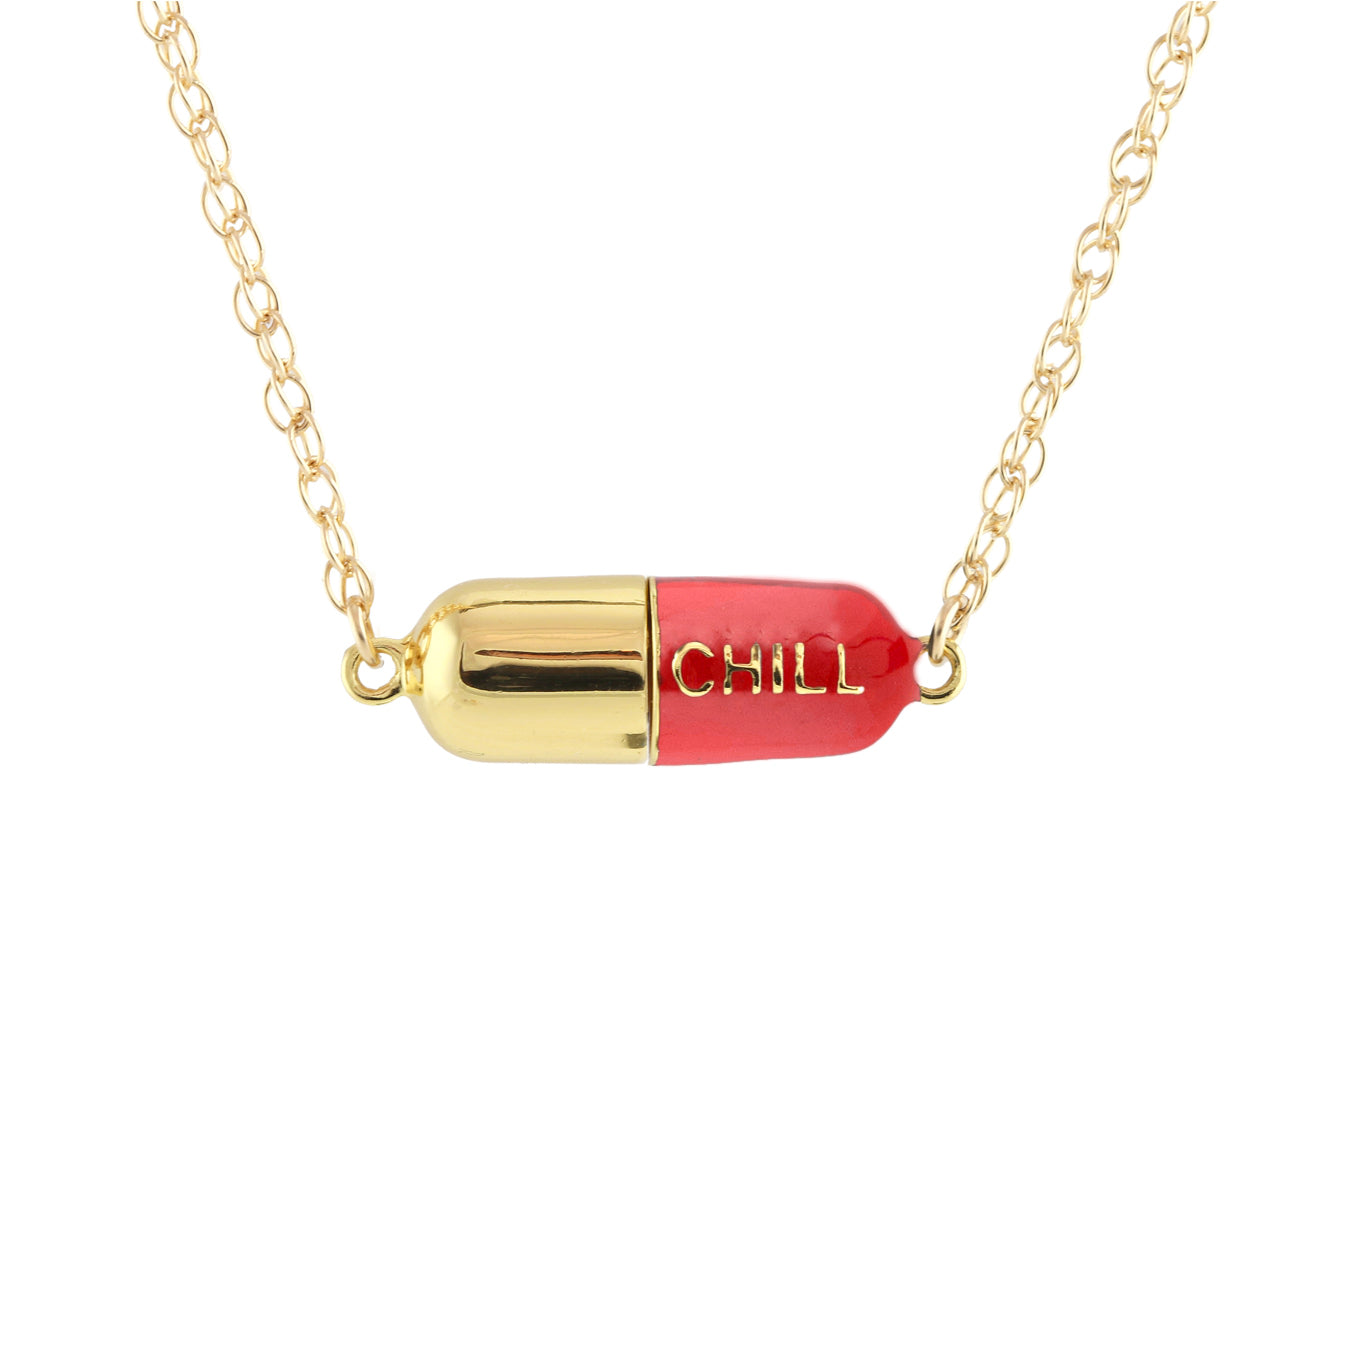 Kris Nations Women's Big Chill Pill Chain Necklace Red & Gold Filled